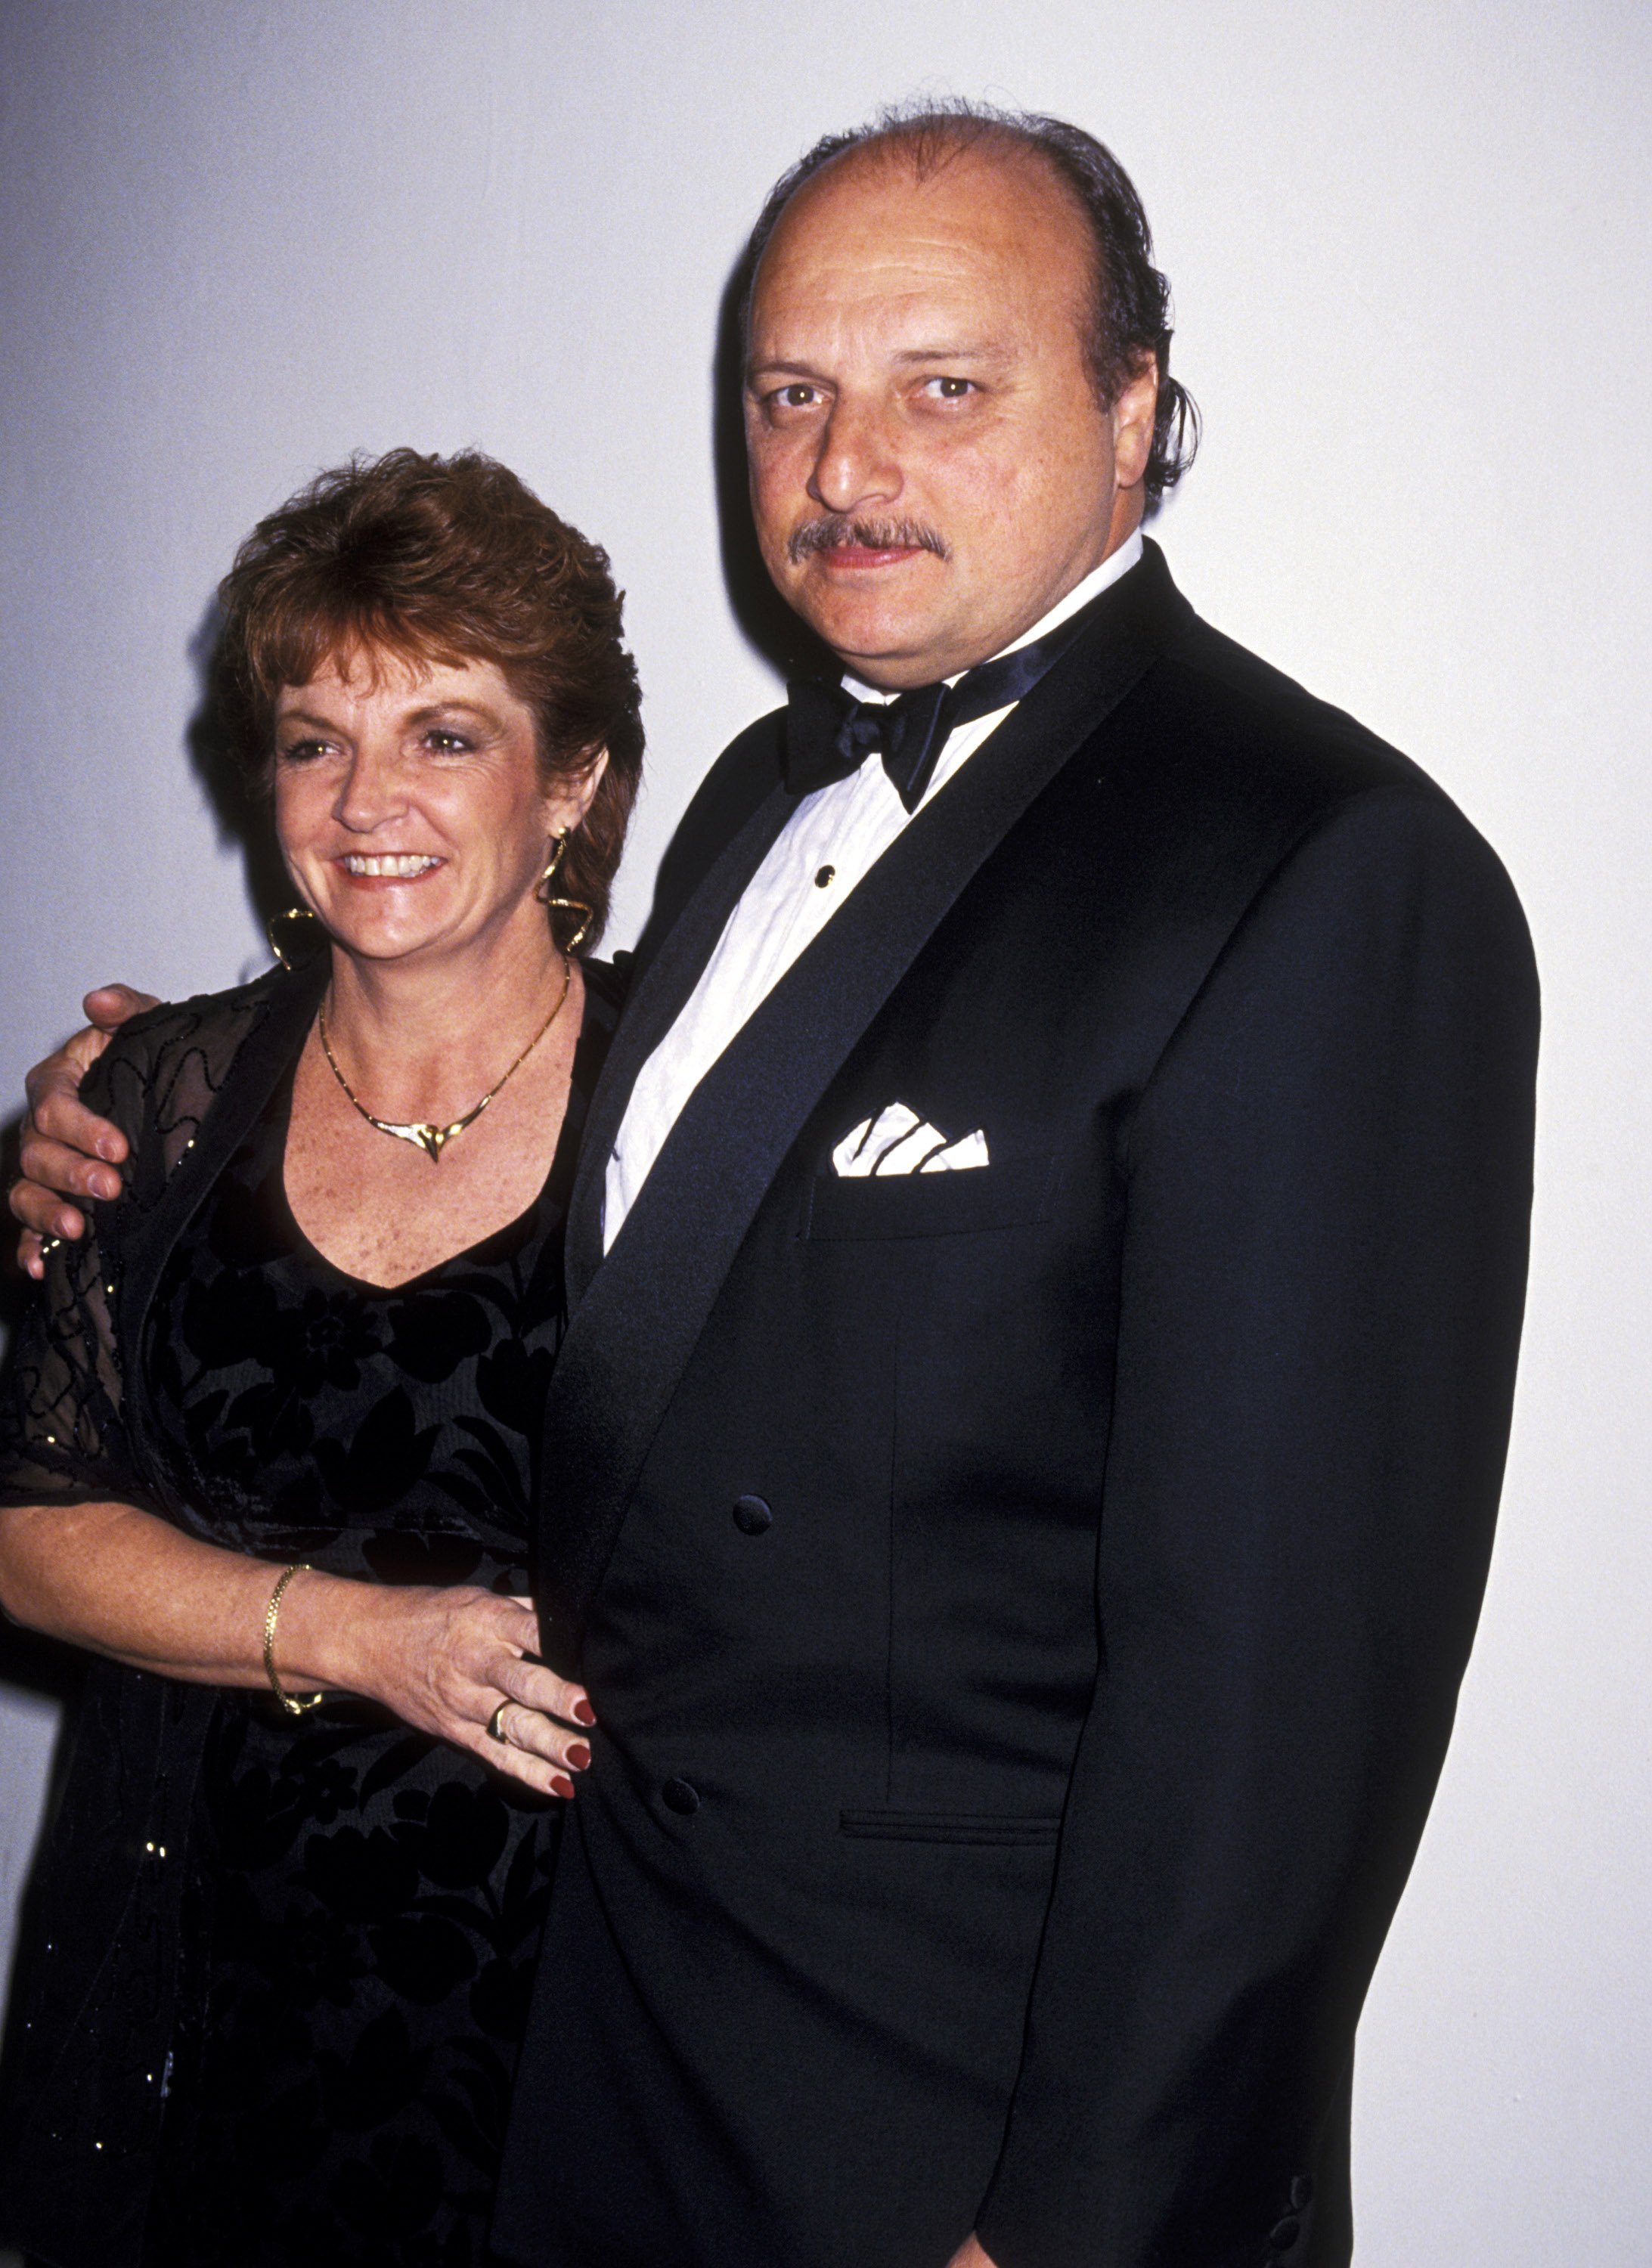 Dennis Franz and Joanie Zeck during 2nd Annual "Forever On My Mind" Mardi Gras Ball at Hollywood Palladium in Hollywood, California. / Source: Getty Images